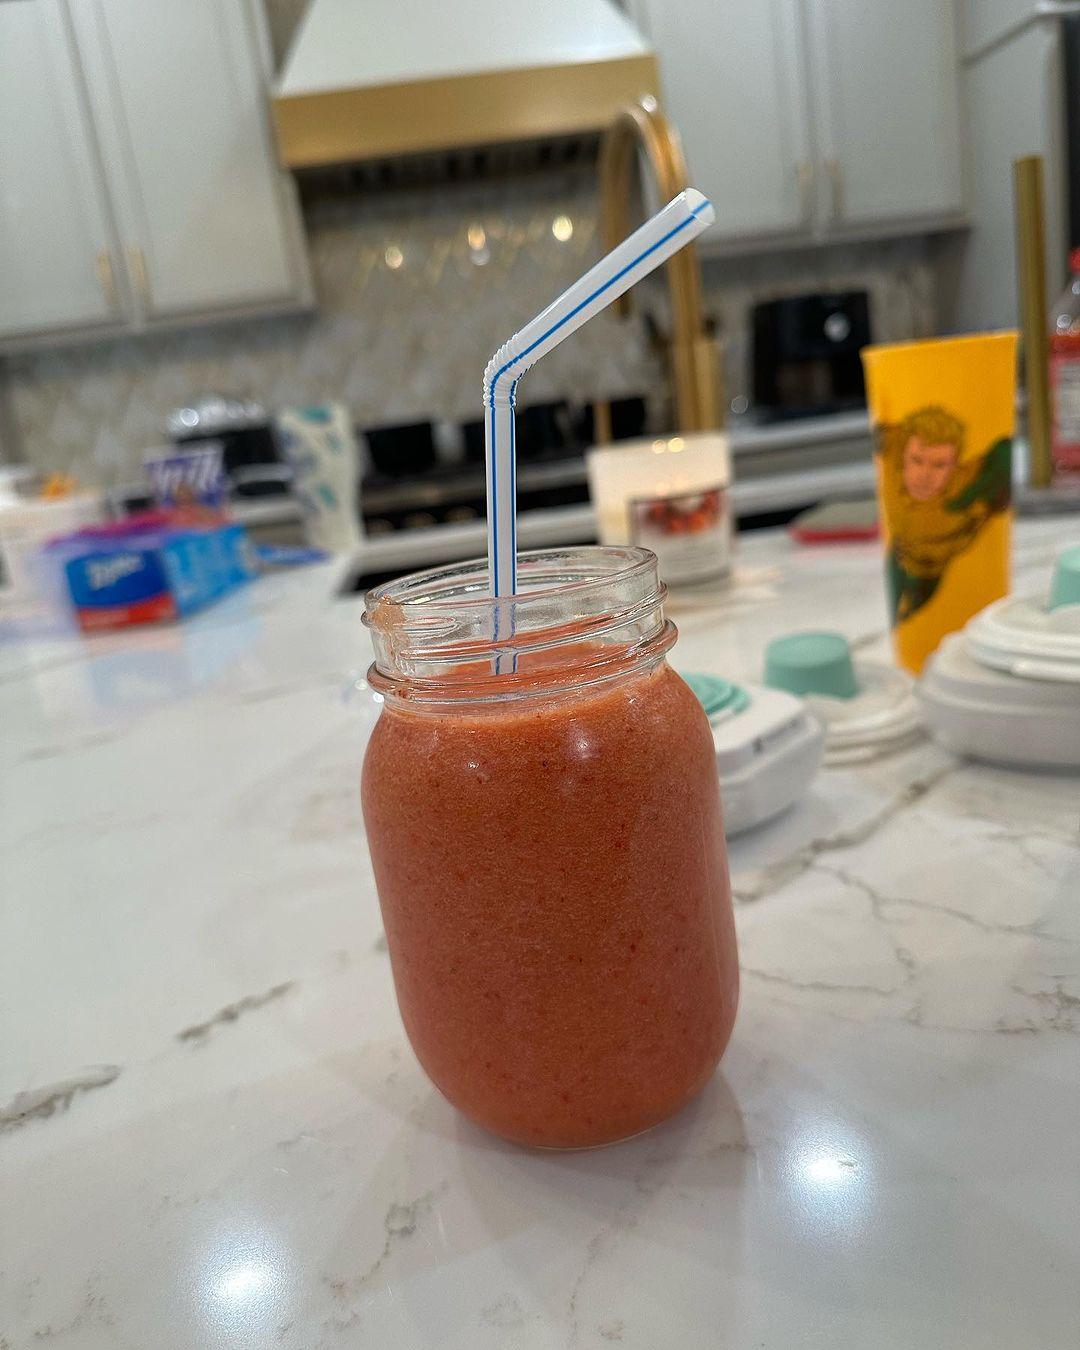 Kailyn Lowry placenta smoothie